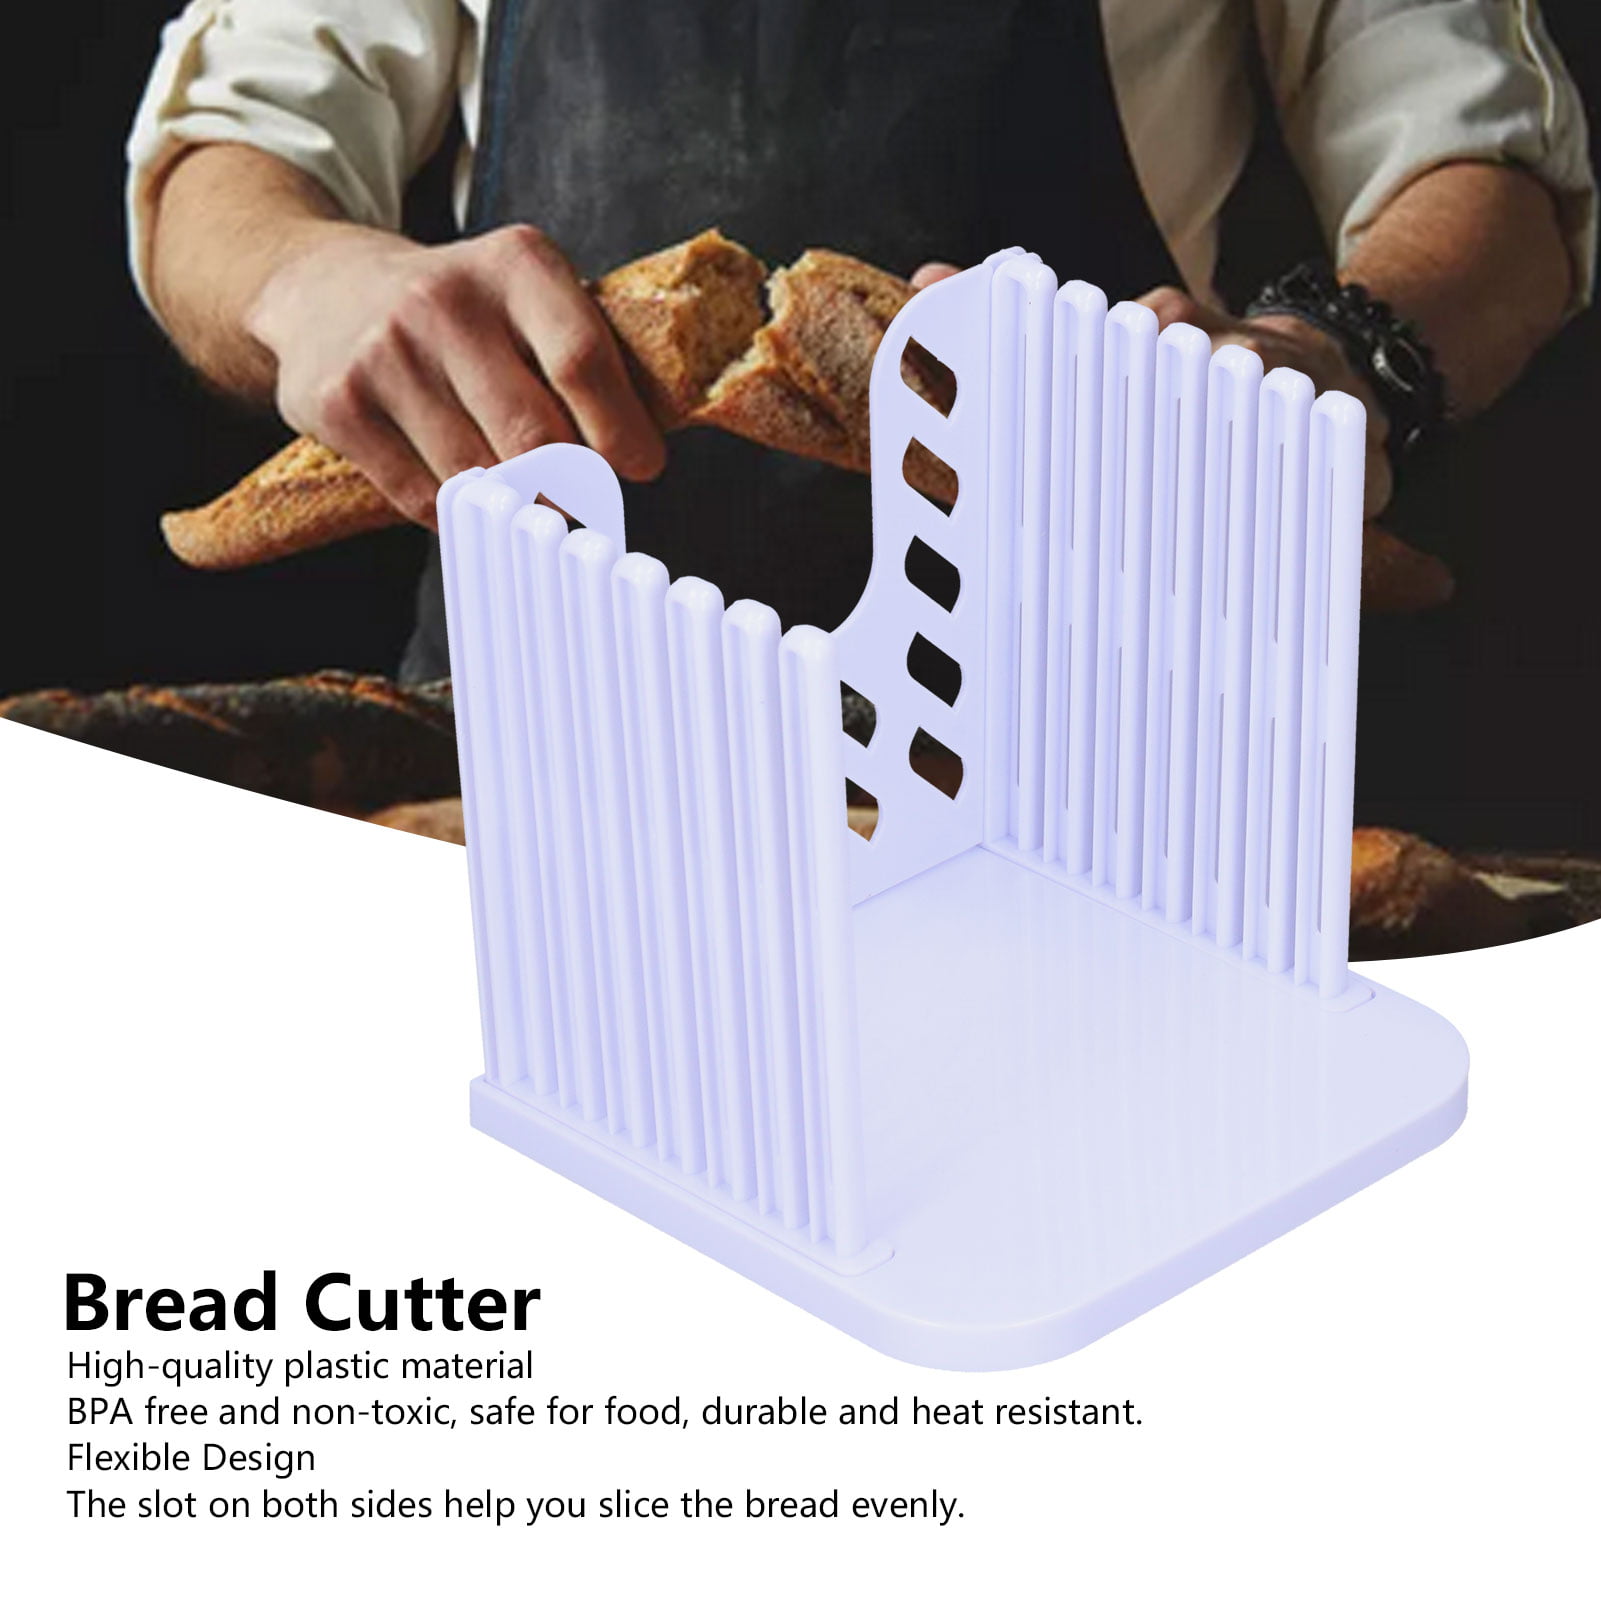 Generic iSH09-M608684mn Bread Slicer for Homemade Bread, Adjustable Toast  Slicing Guide, Slices Evenly Loaf Cutting Guide, Foldable Sandwich Bagel  Cutt